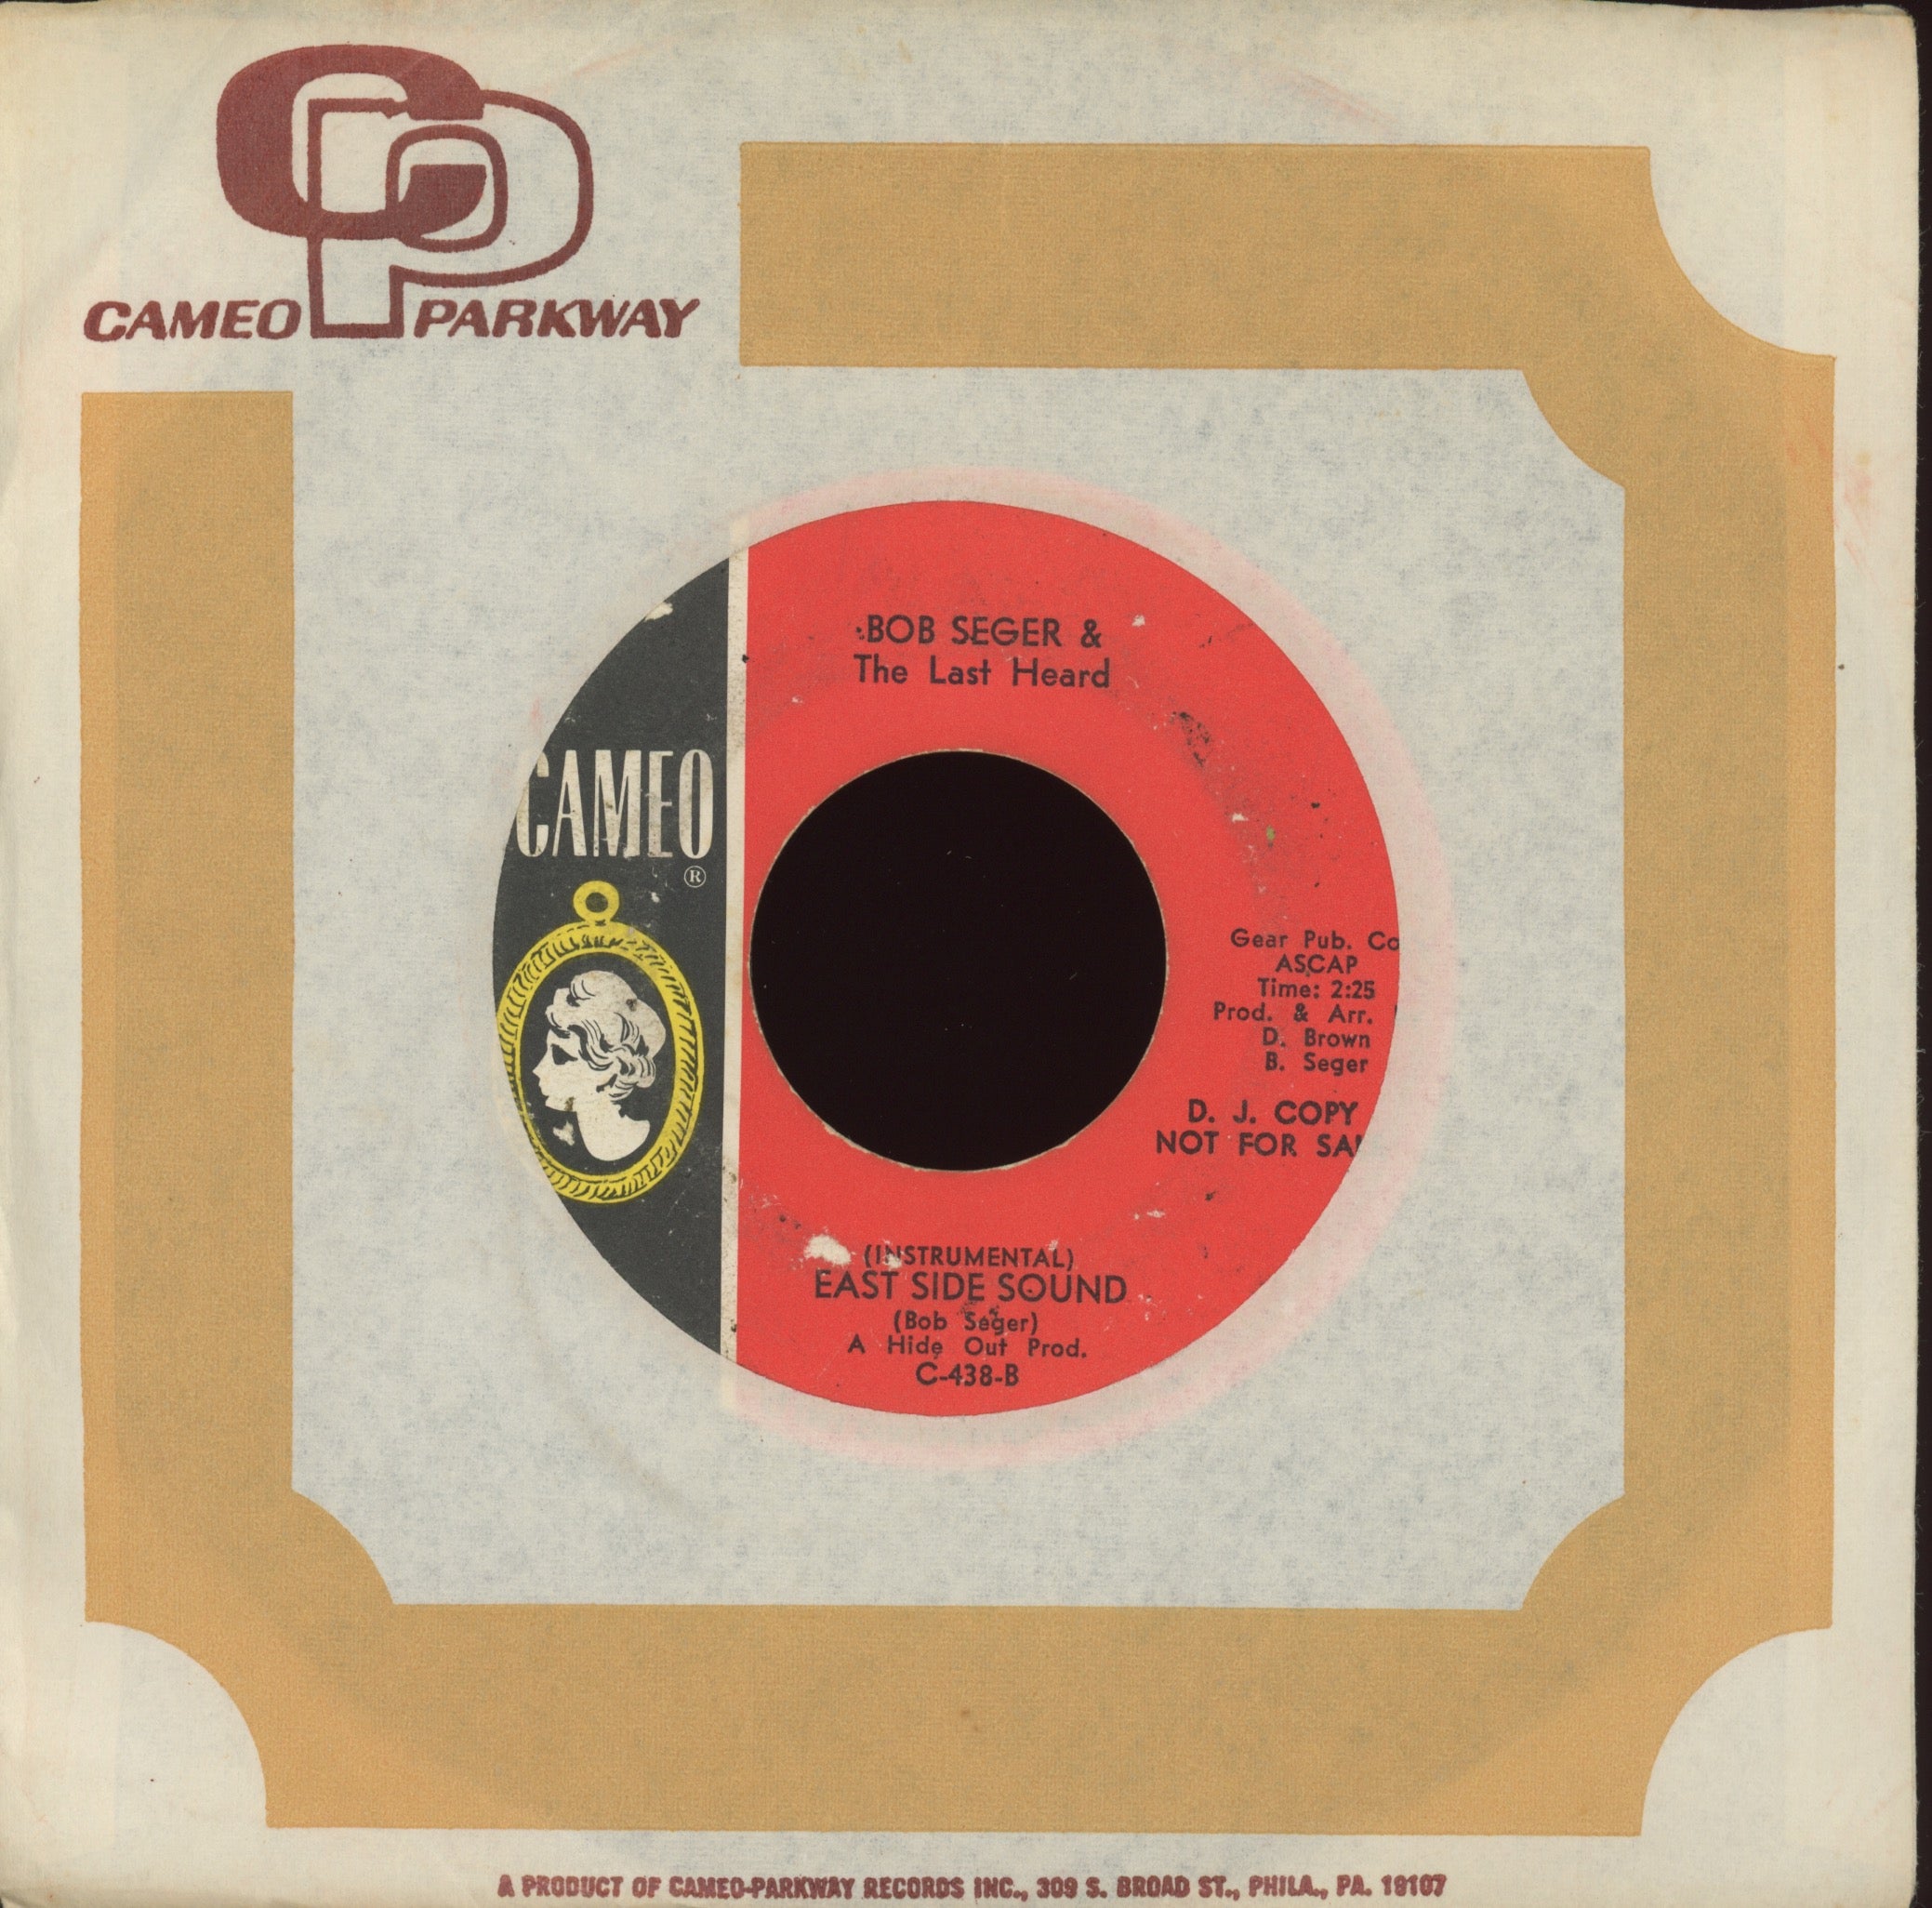 Bob Seger And The Last Heard - East Side Story on Cameo Promo Garage 45